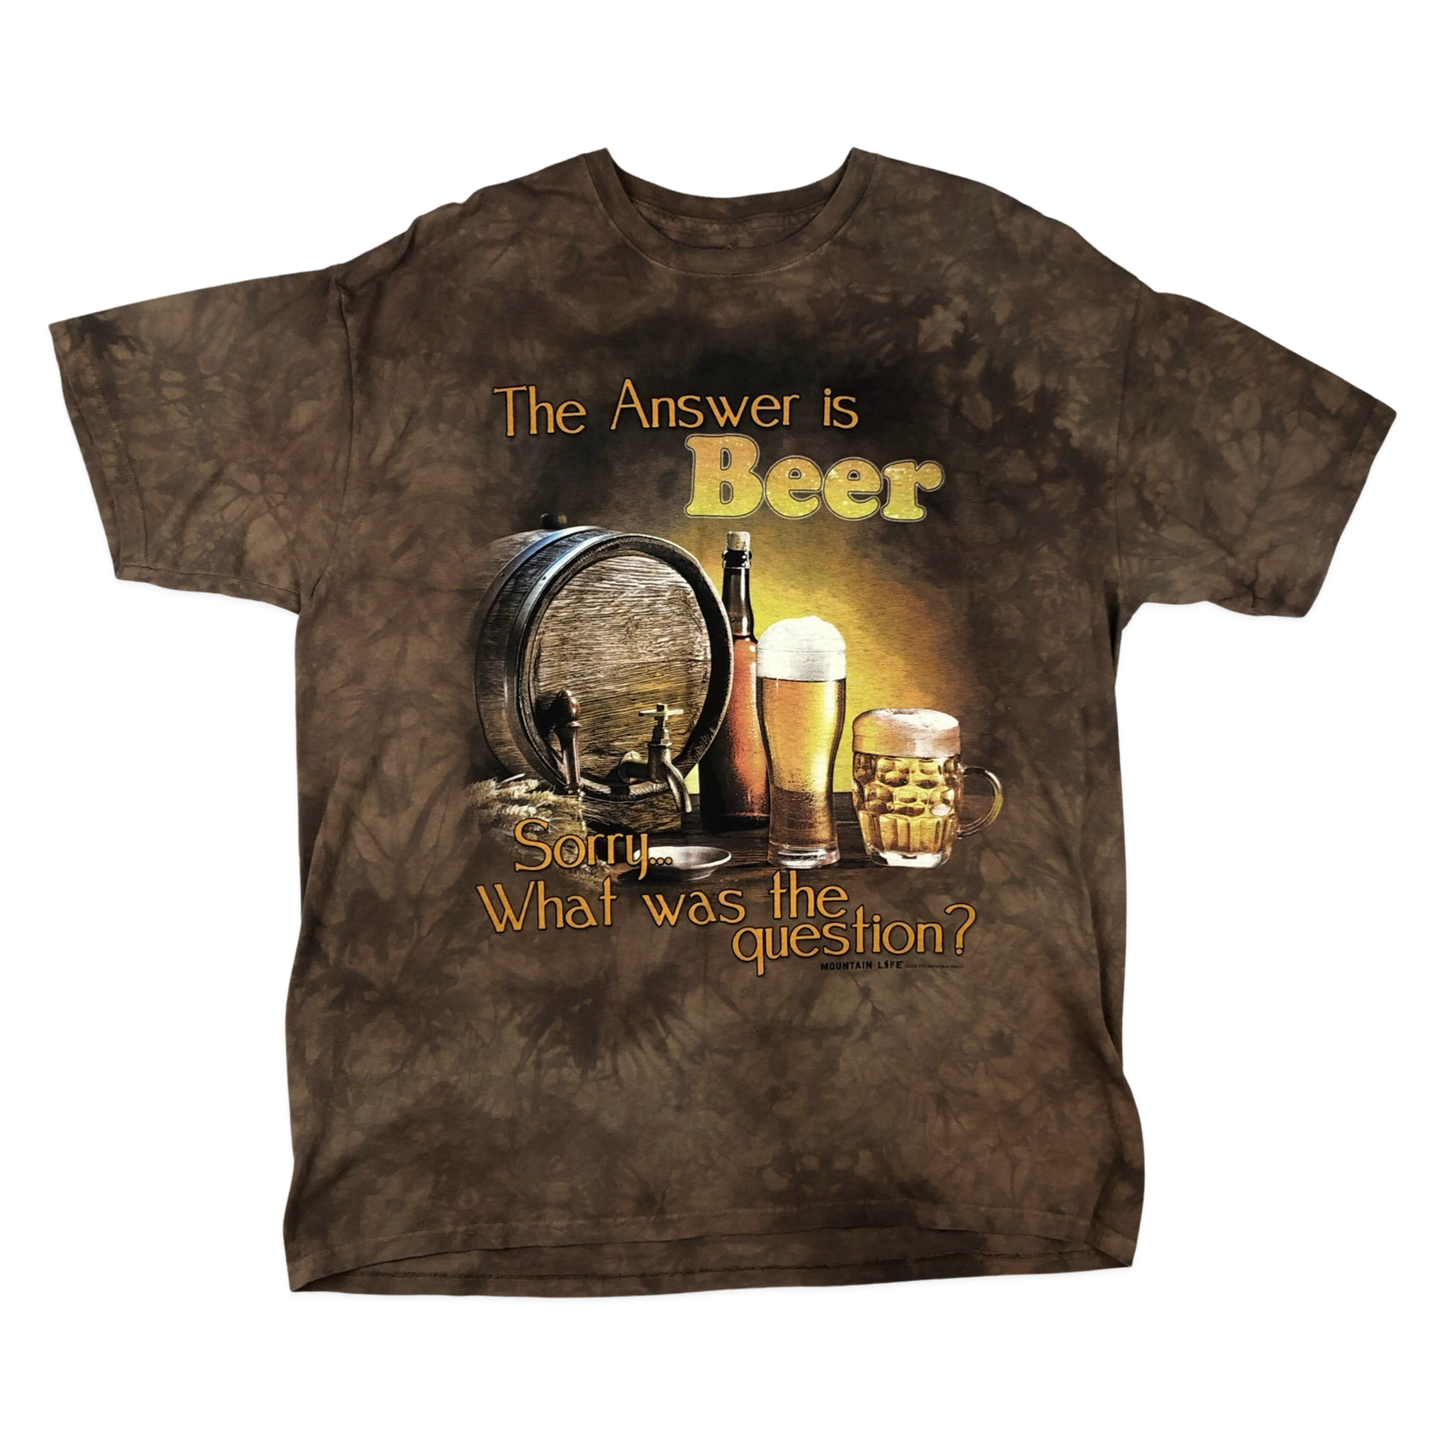 Vintage Brown The Mountain Beer Novelty Tee XL